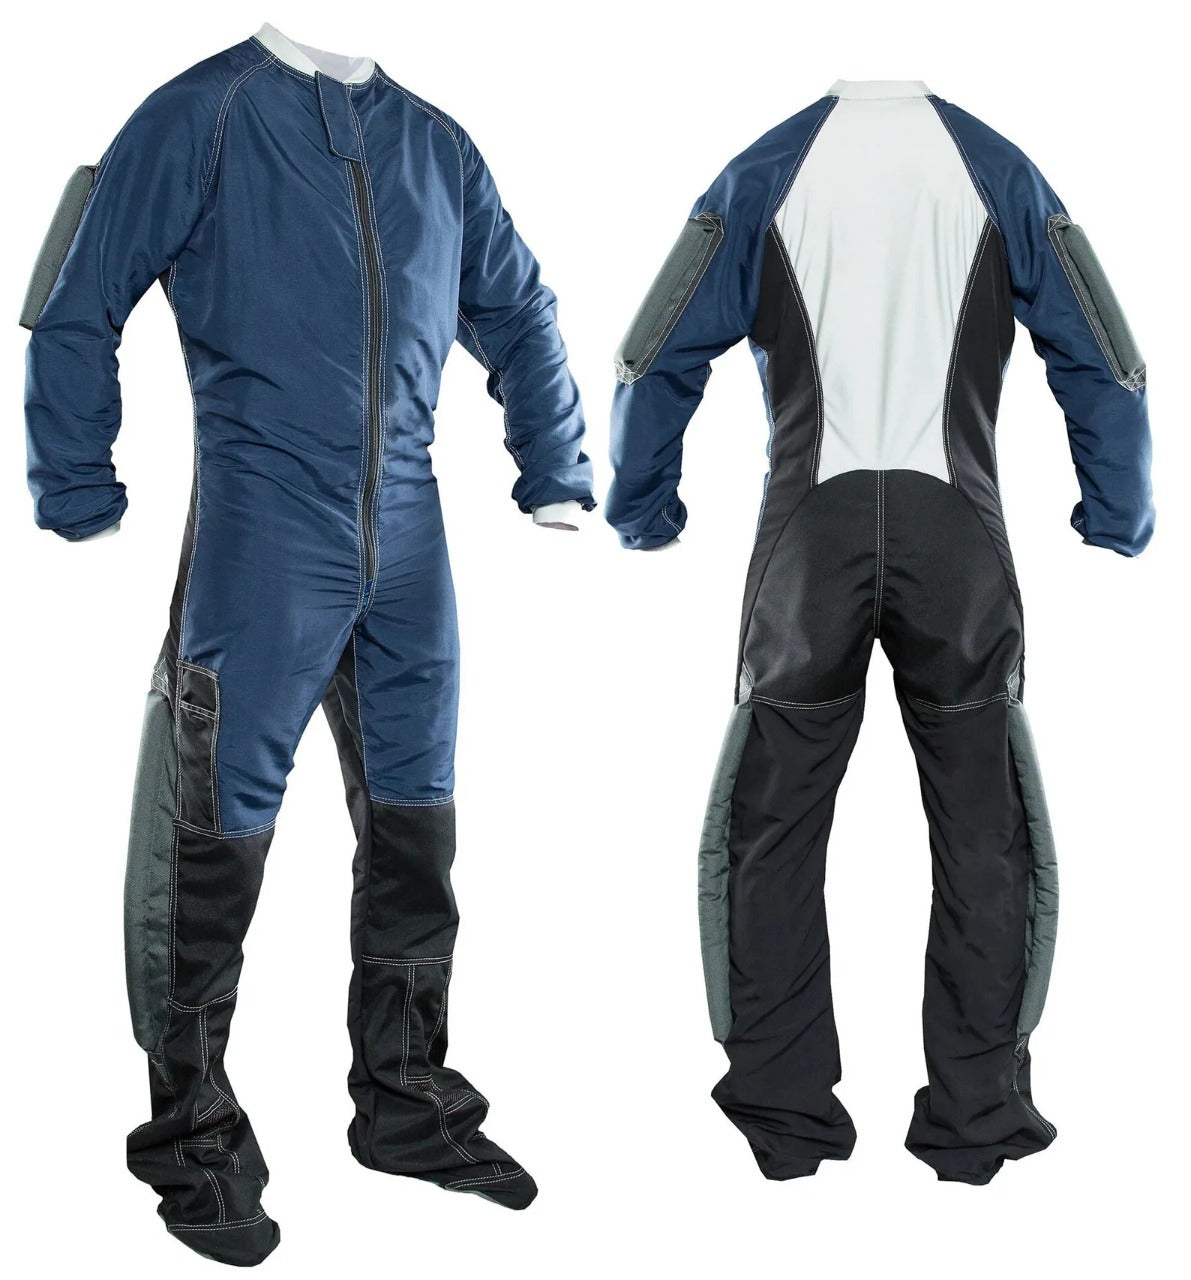 Skydiving Formation Suit in Blue Color RW-21